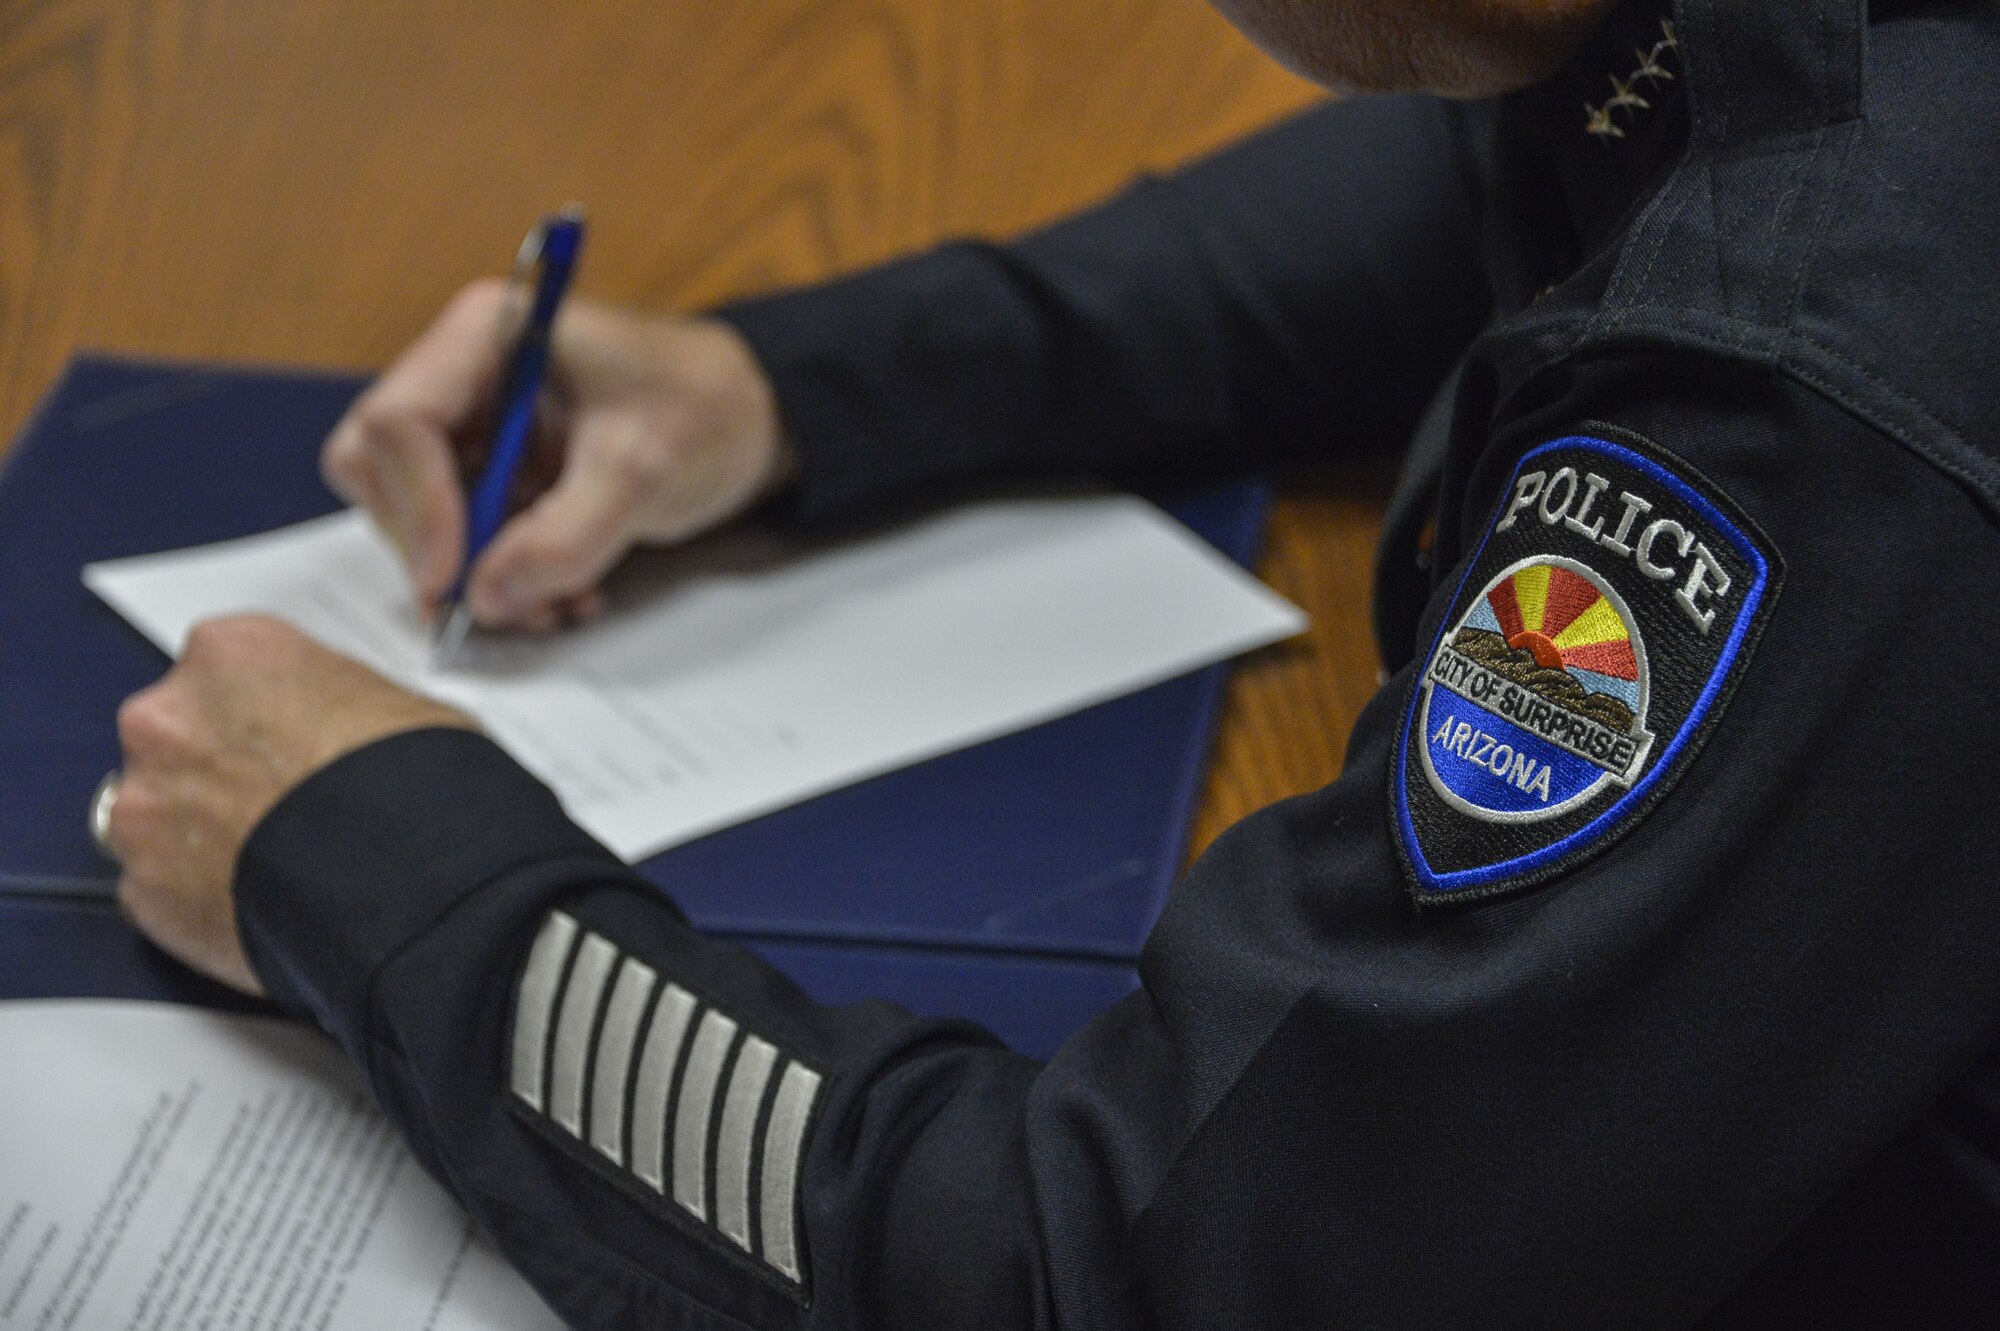 Terry Young, Surprise Police Department police chief, signs the Emergency Vehicle Operators Course Memorandum of Understanding at Luke Air Force Base, Ariz., Jan. 10, 2018. The memorandum allows El Mirage, Peoria and Surprise police departments, in conjunction with 56th SFS members, to train and utilize space and resources at Luke. (U.S. Air Force photo/Airman 1st Class Caleb Worpel)